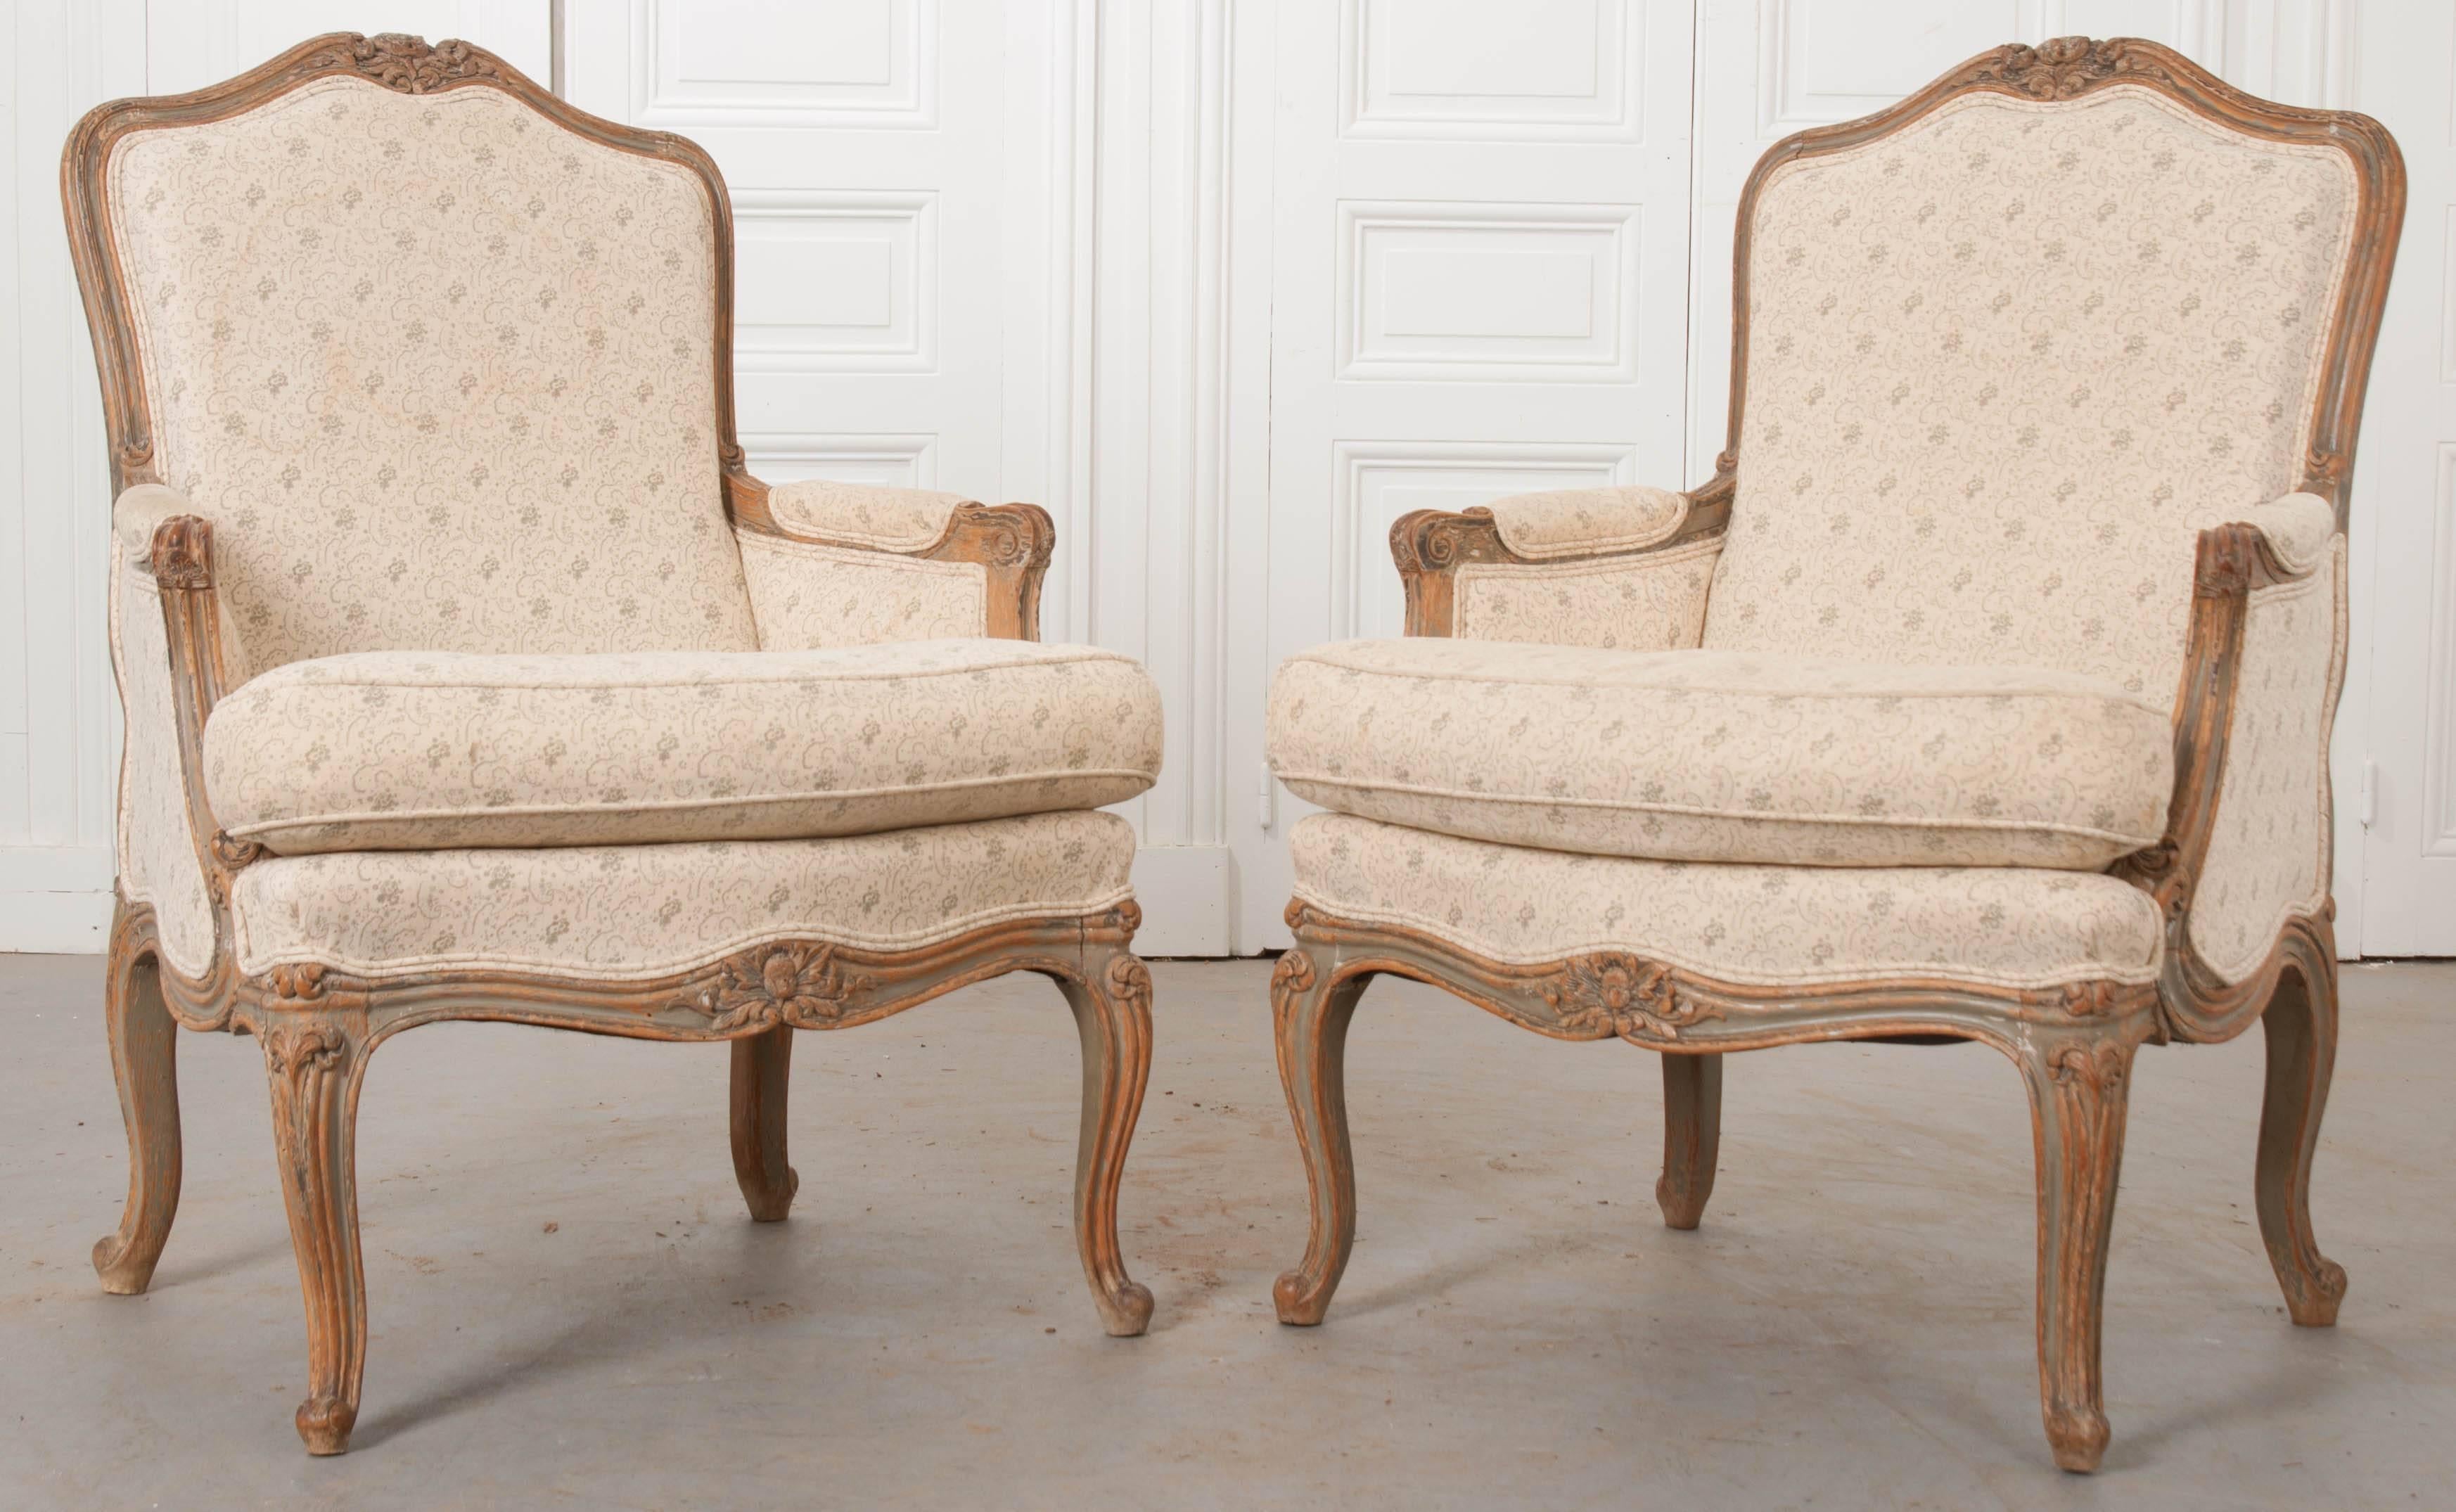 A fabulous pair of carved and painted Louis XV style bergères from 19th century France. These beautiful chairs are upholstered in a patterned linen and have a soft green plaid upholstered posterior. The upholstery is not original to the pair, and